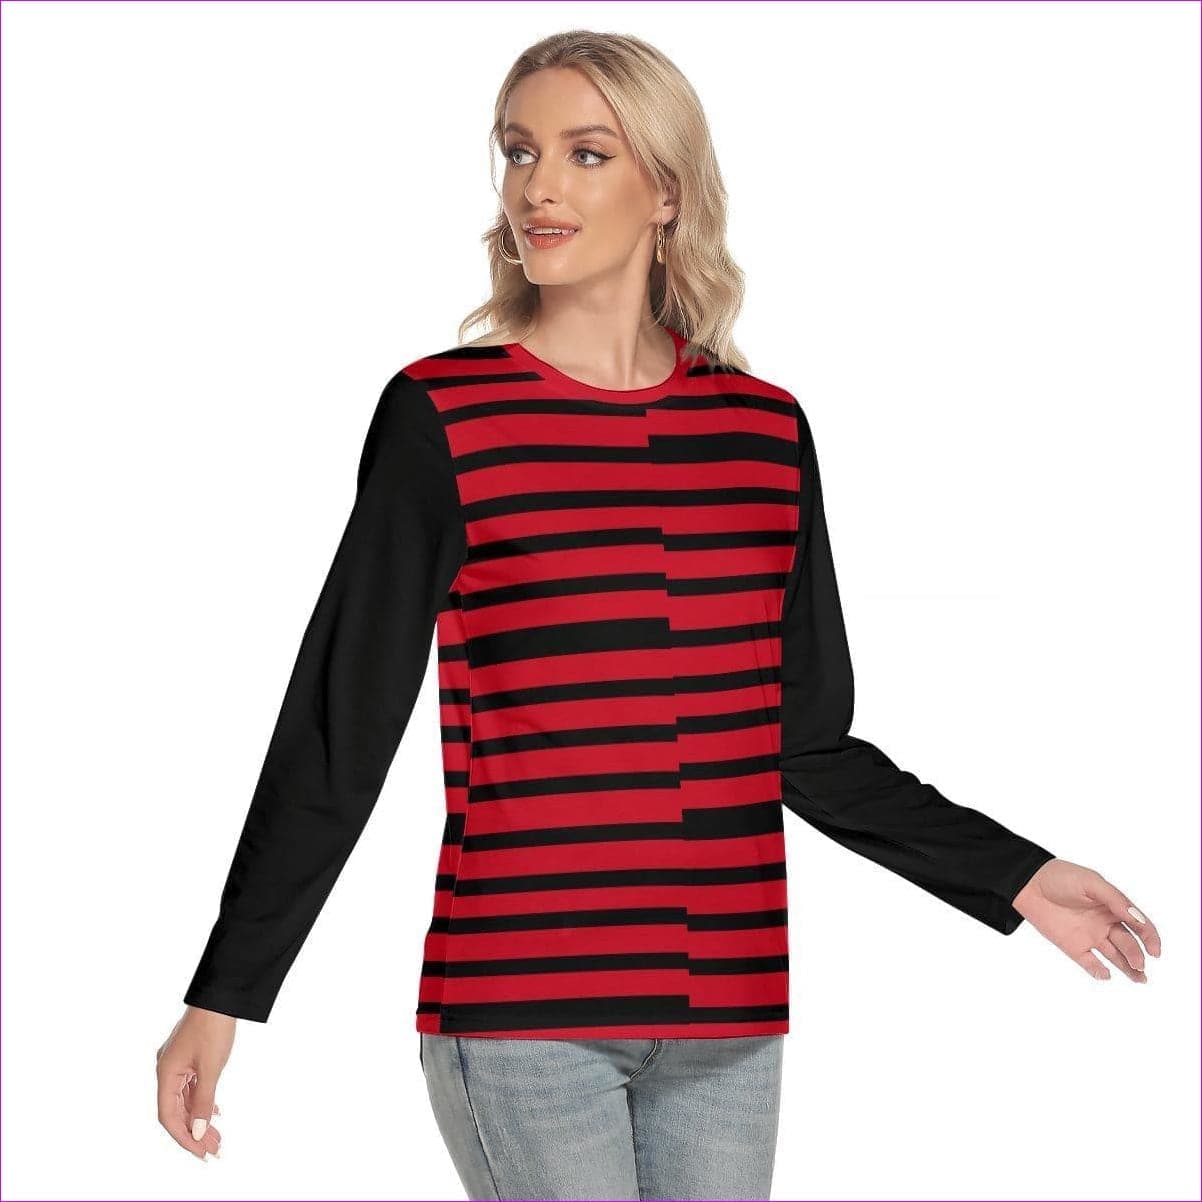 red Striped Women's O-neck Long Sleeve T-shirt - Women's T-Shirts at TFC&H Co.